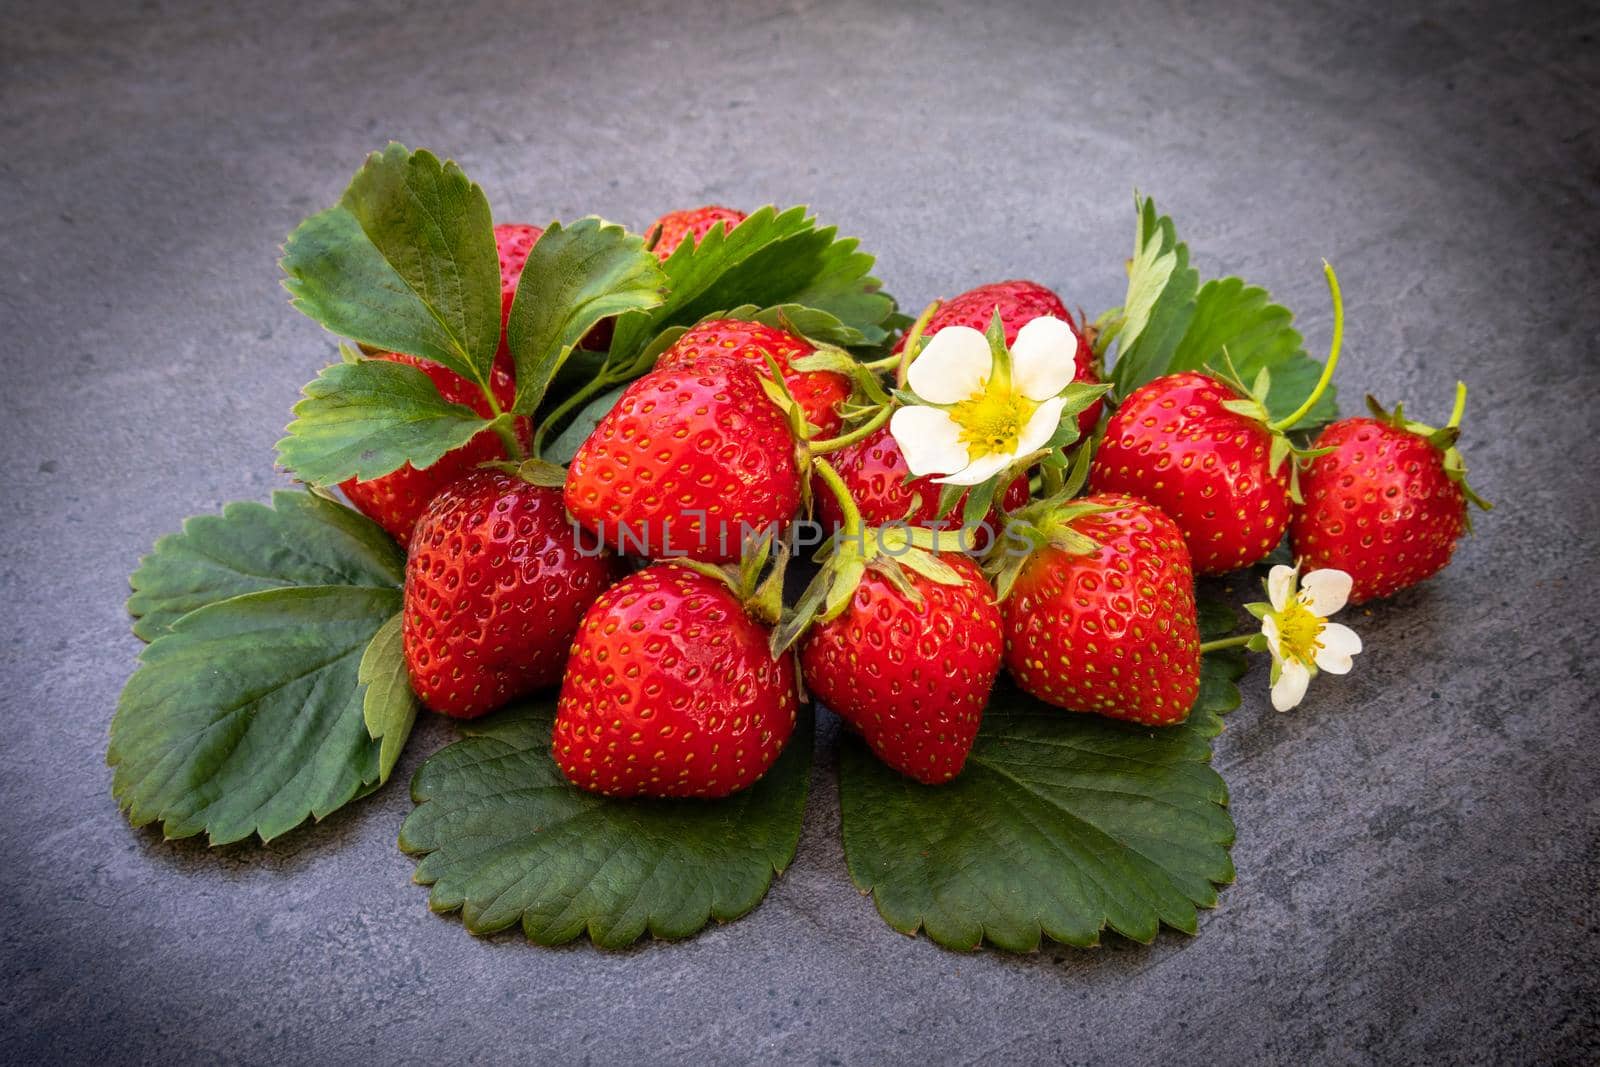 Red ripe strawberries with leaves over dark background